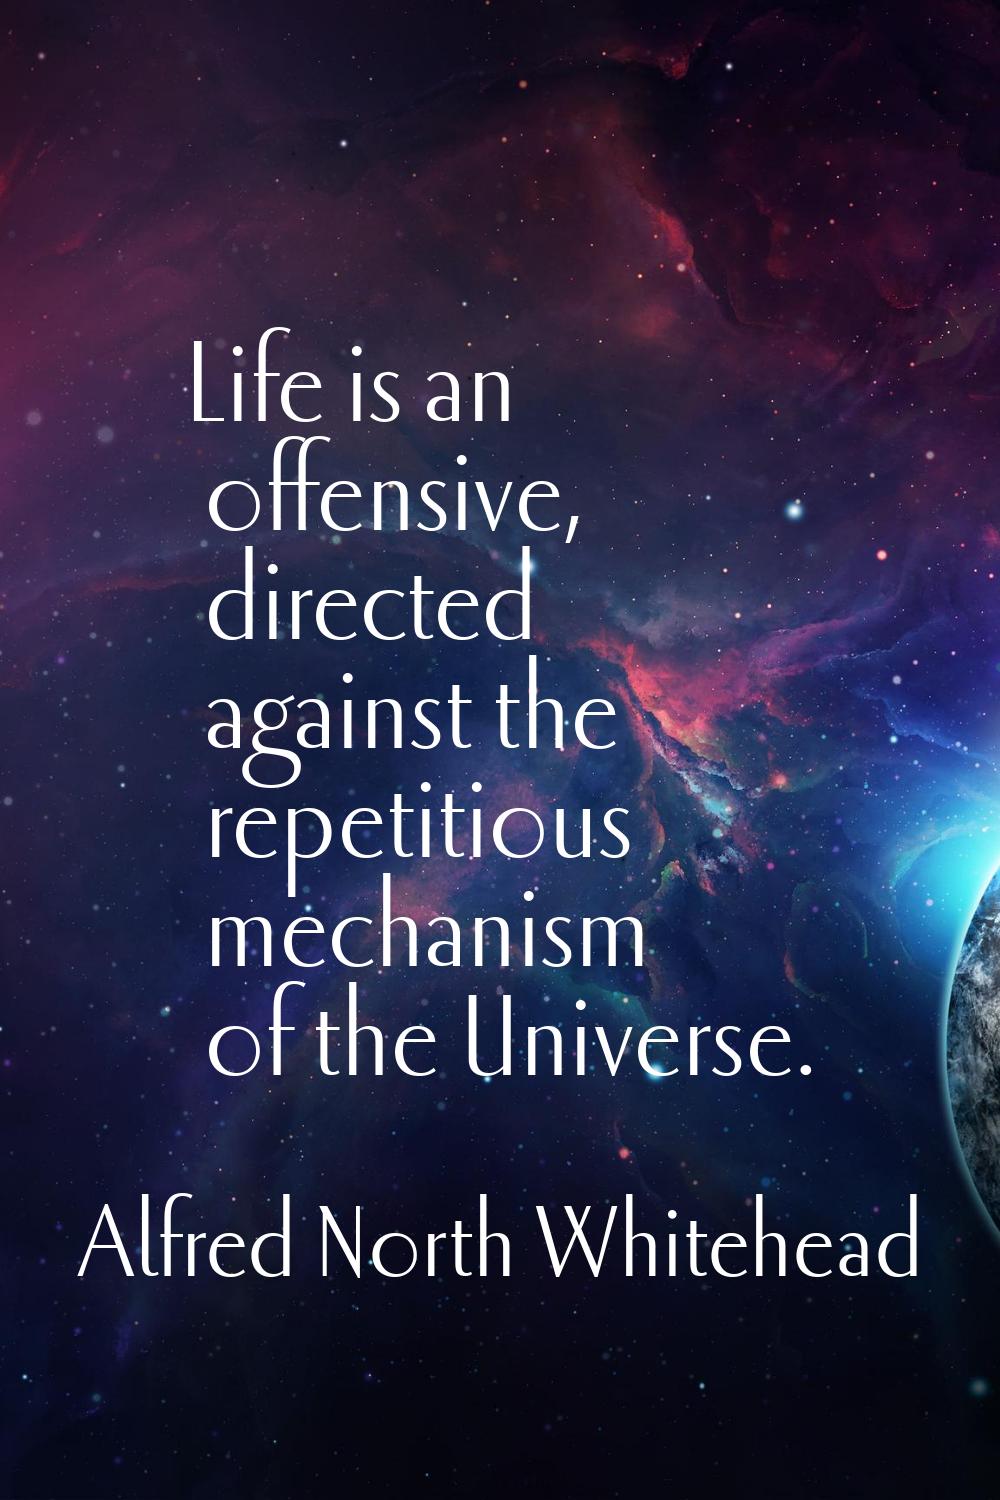 Life is an offensive, directed against the repetitious mechanism of the Universe.